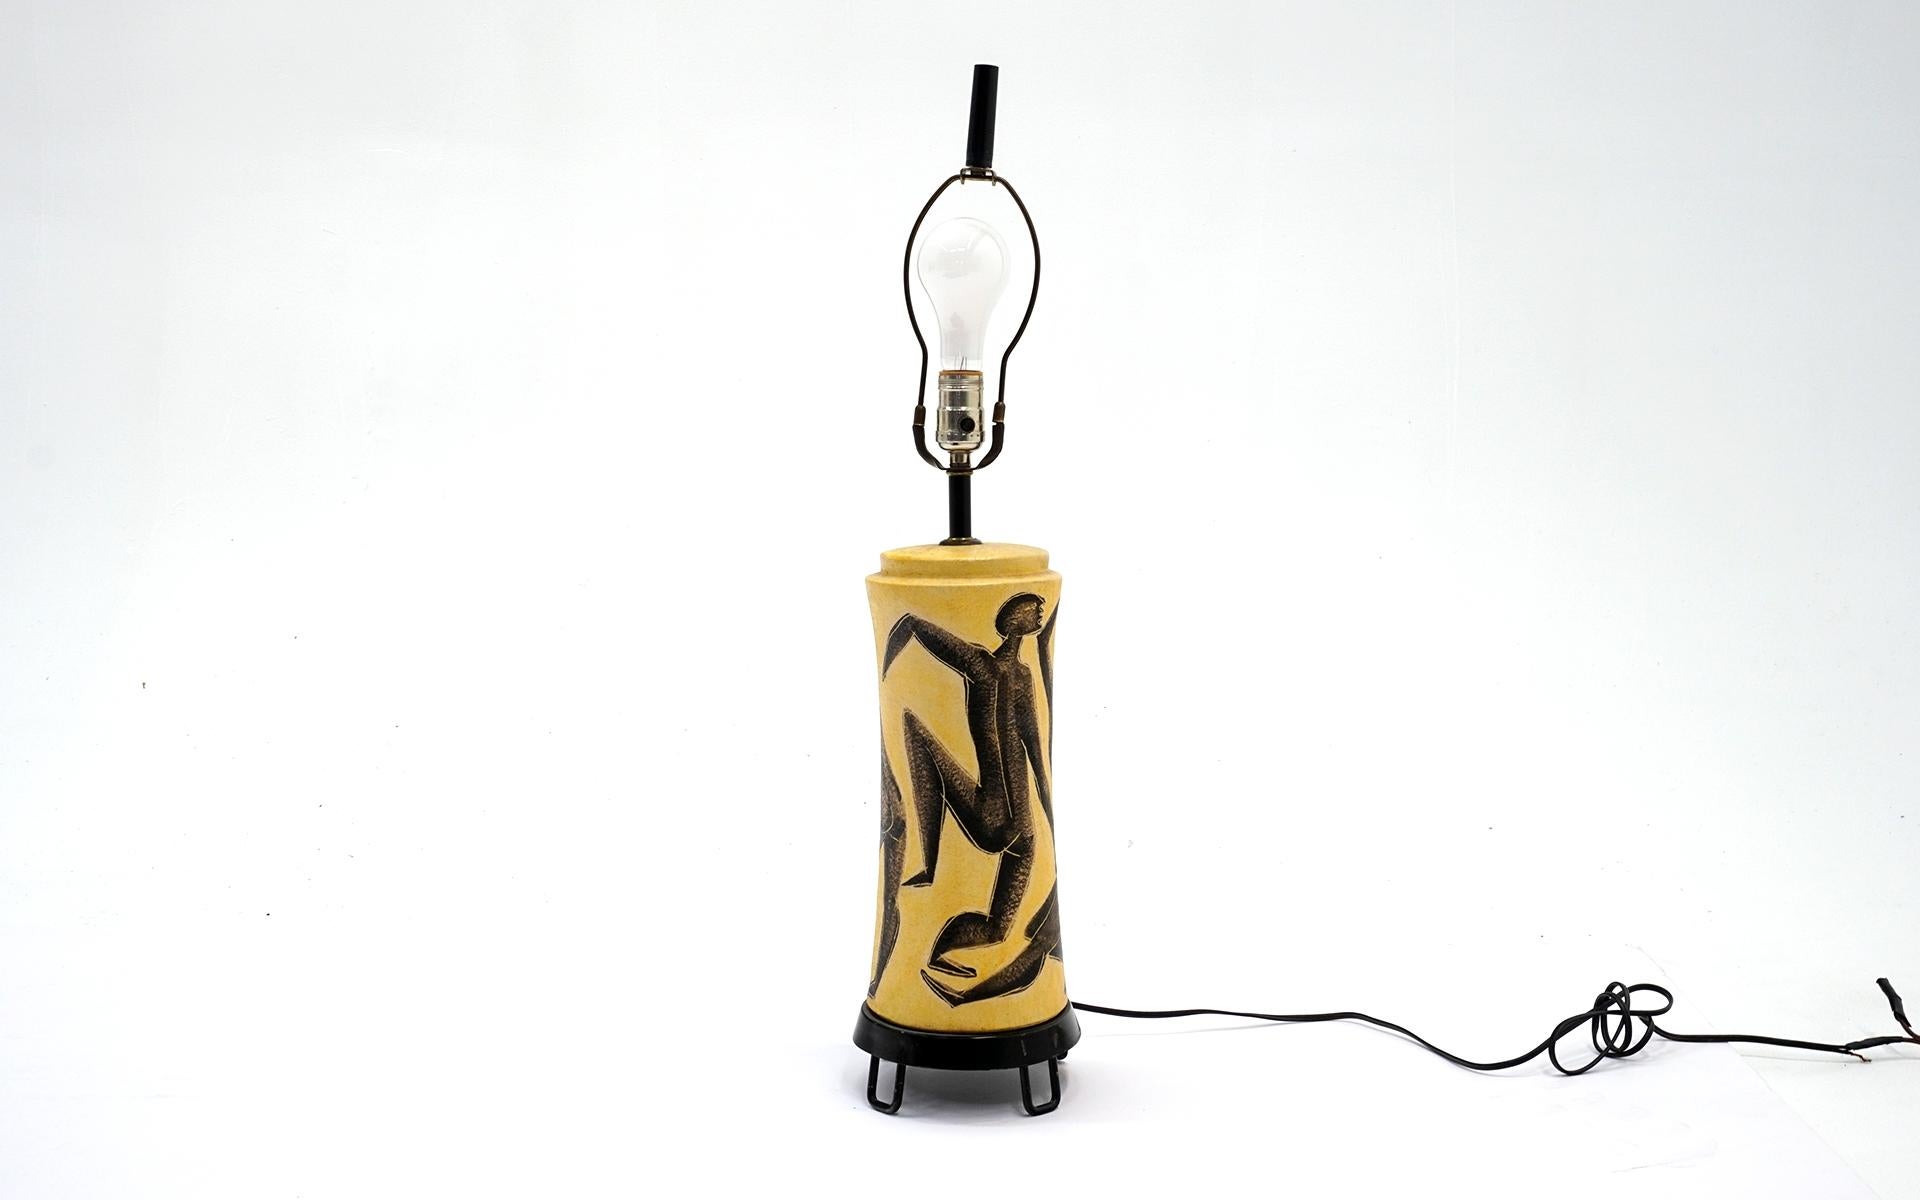 Rare 1950s pottery table lamp by Marcello Fantoni. Includes the shade and the original finial. Hand painted figural forms in charcoal / black on a yellow background. No chips, cracks, or repairs. Some losses to the enamel on the base. The threading